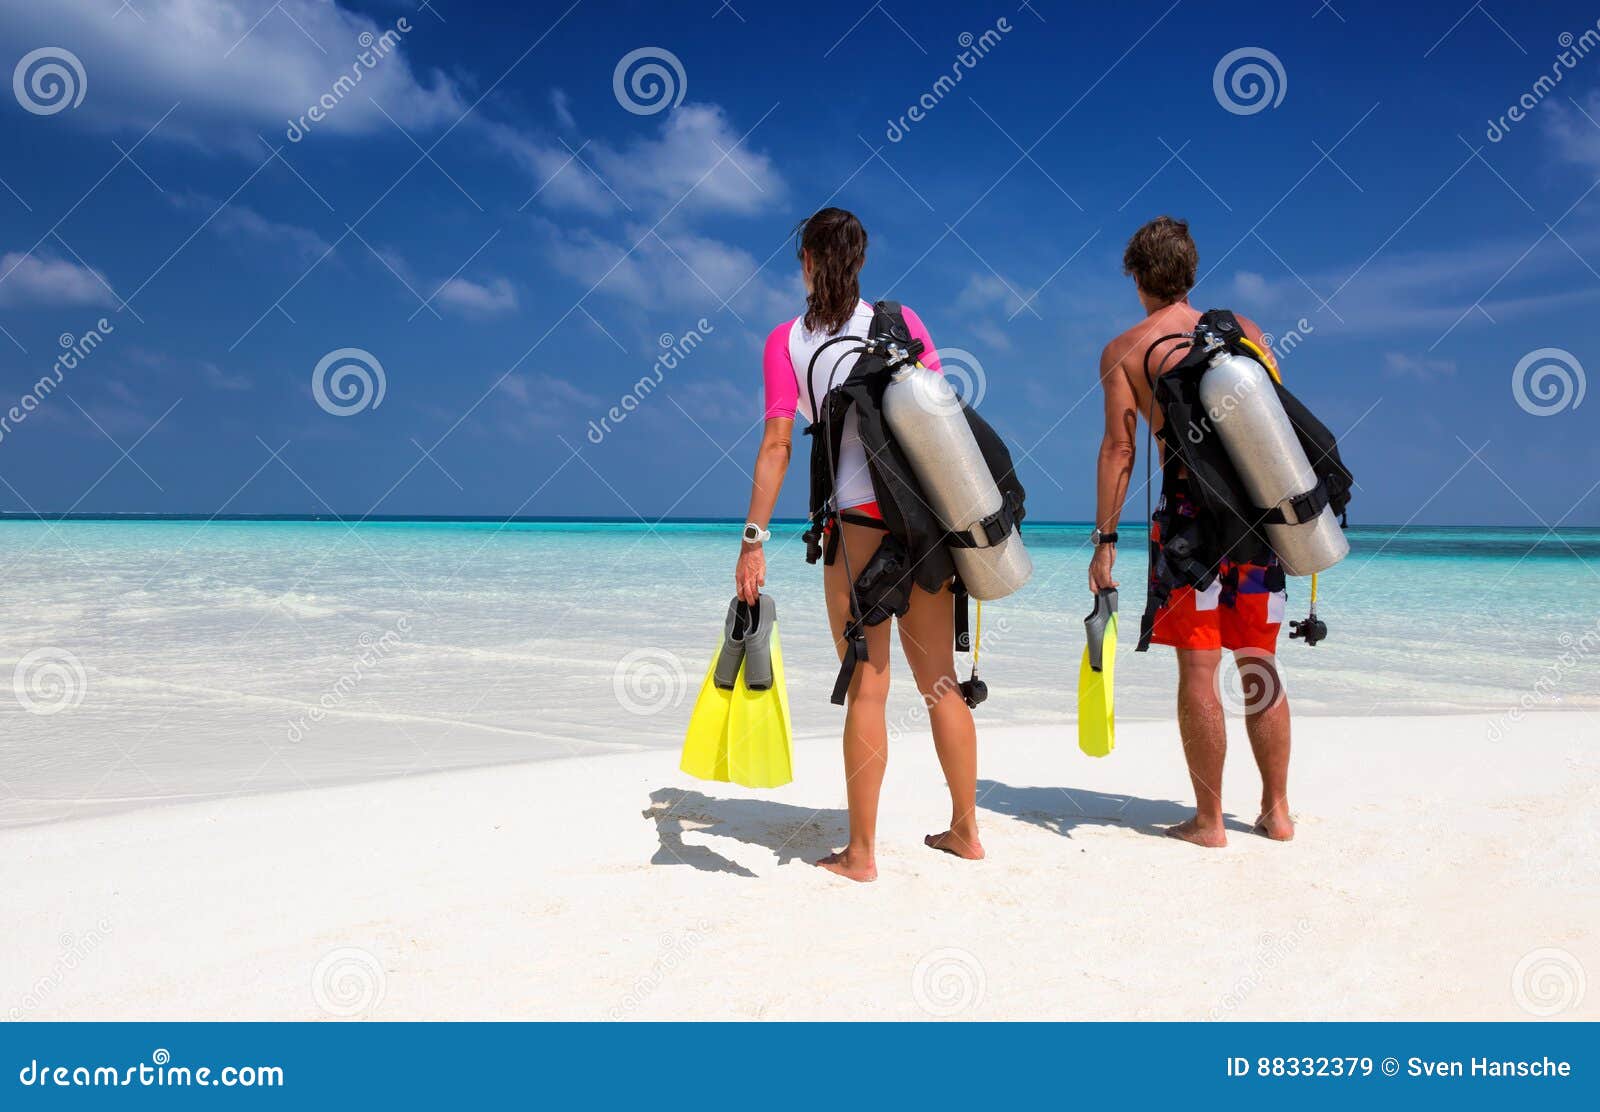 young couple in scuba diving gear